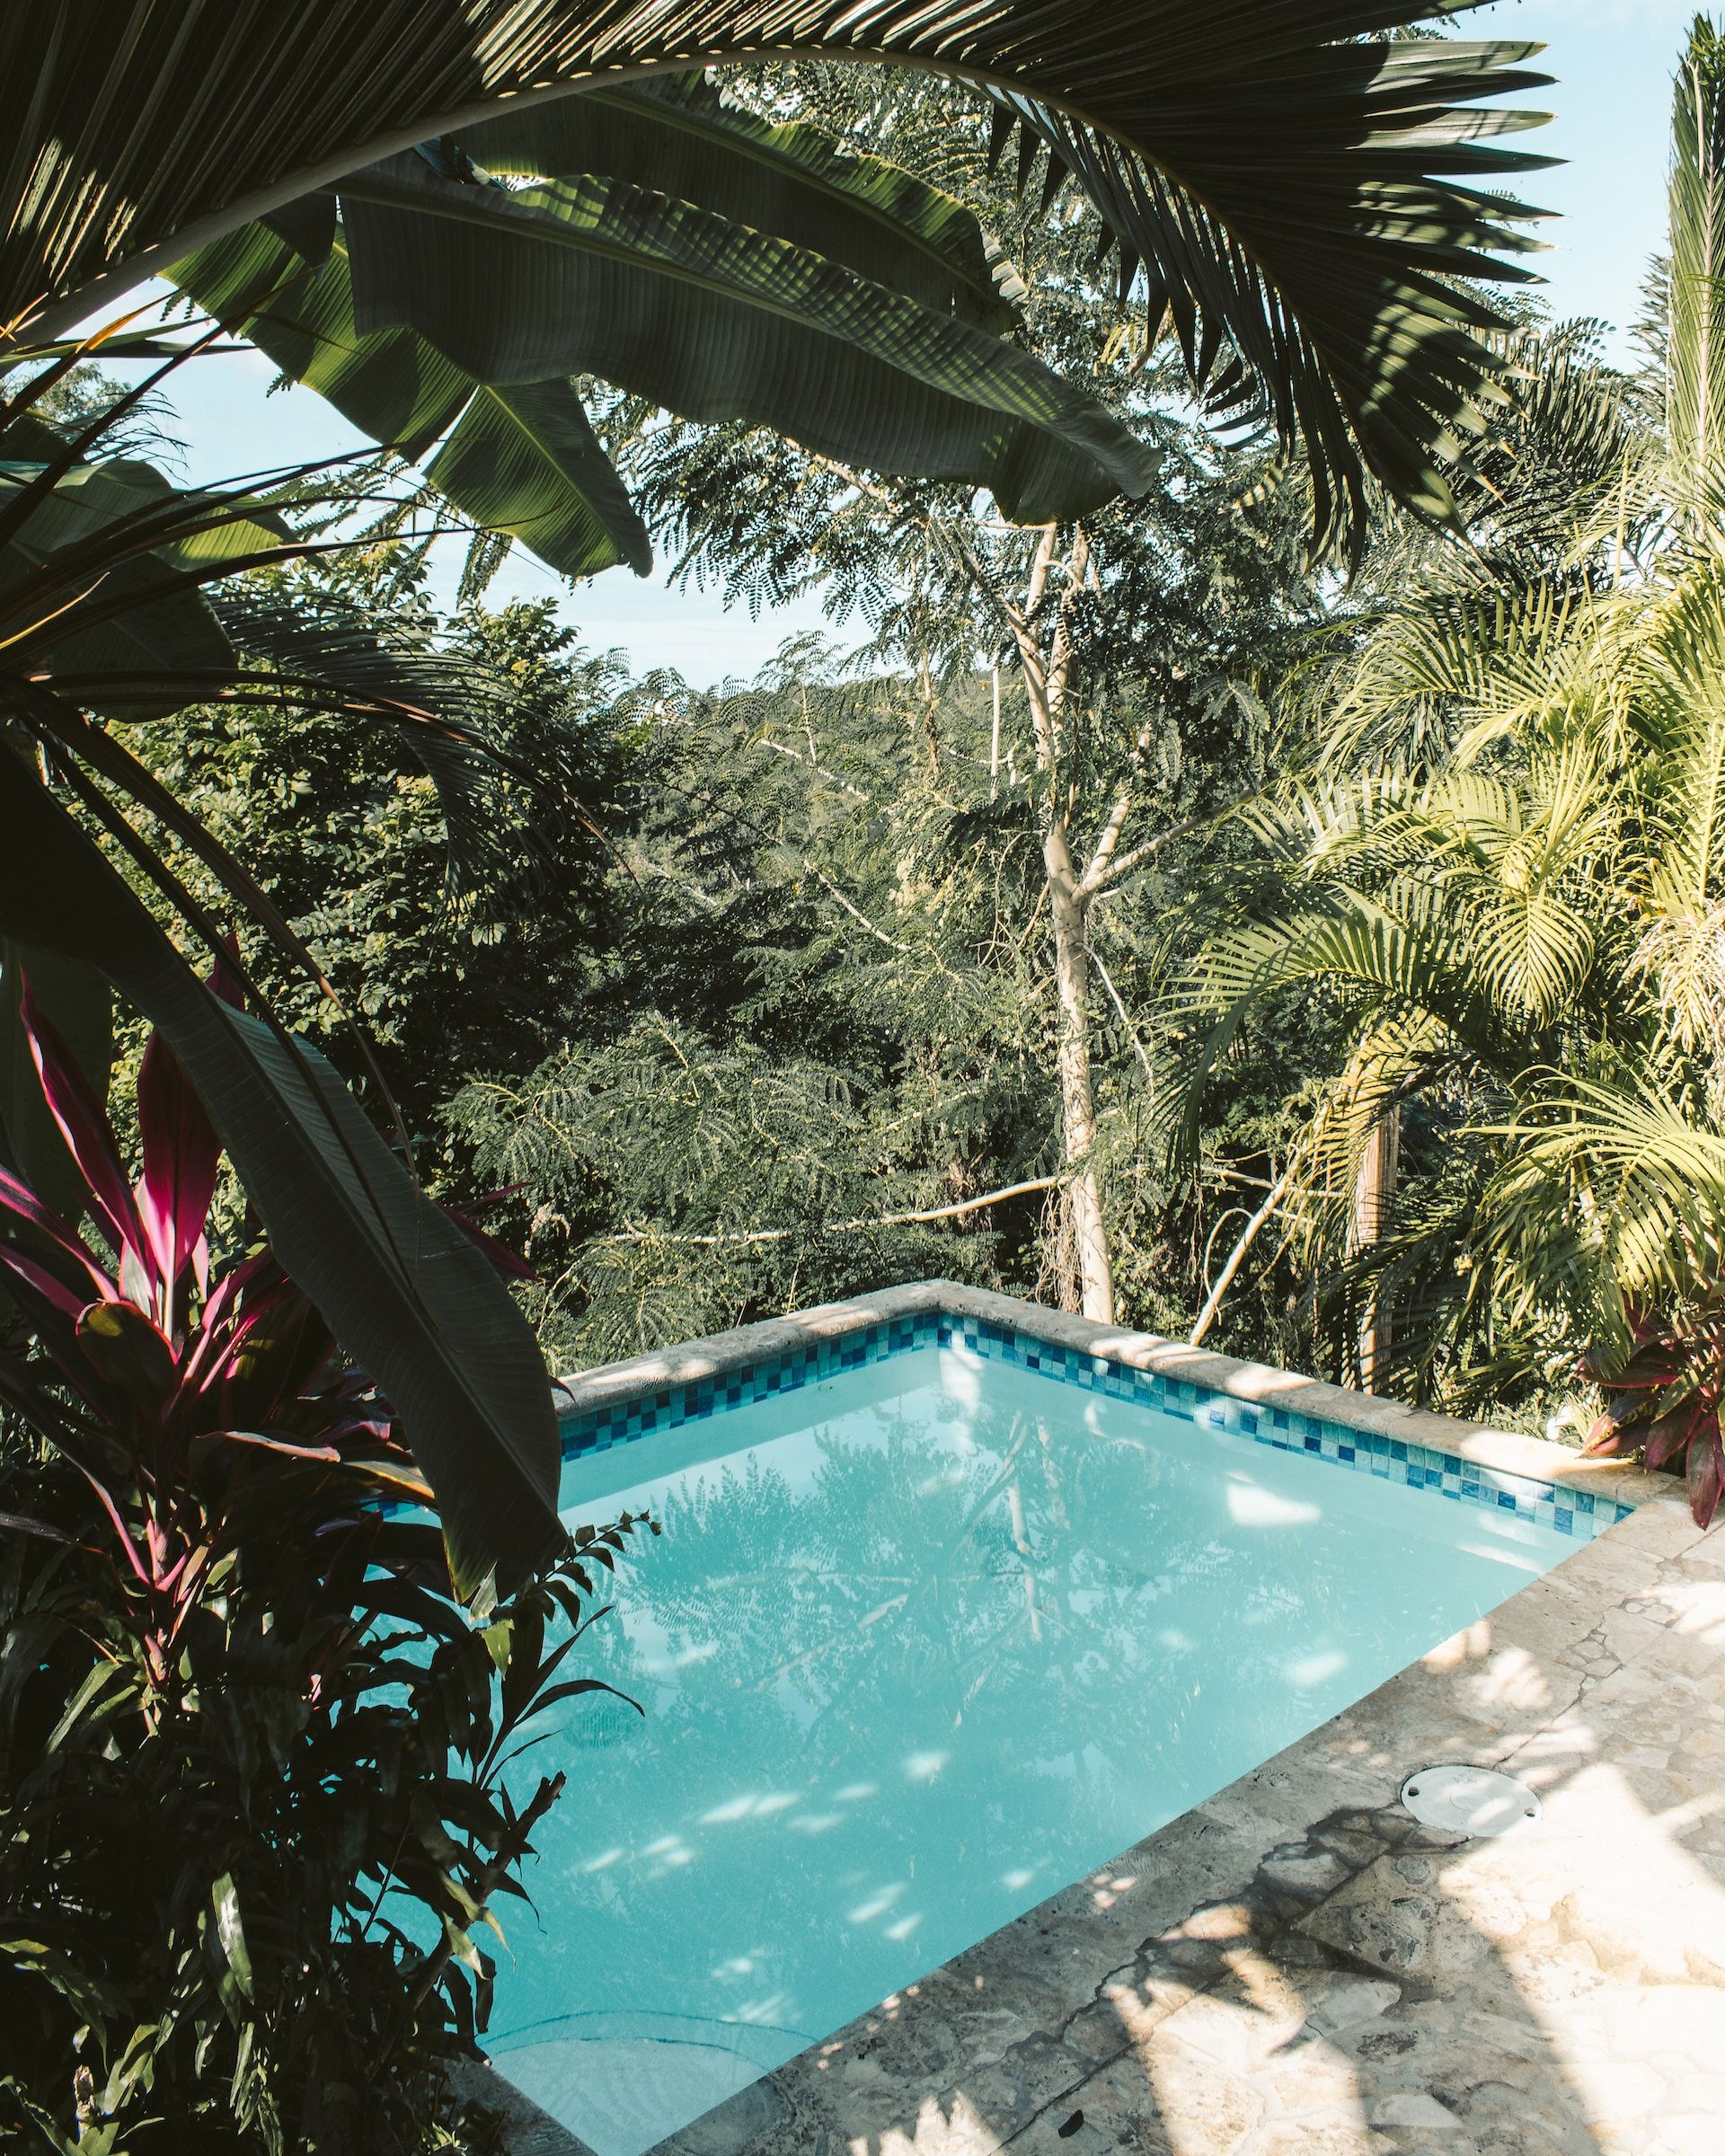 A small pool amid lush greenery in Puerto Rico